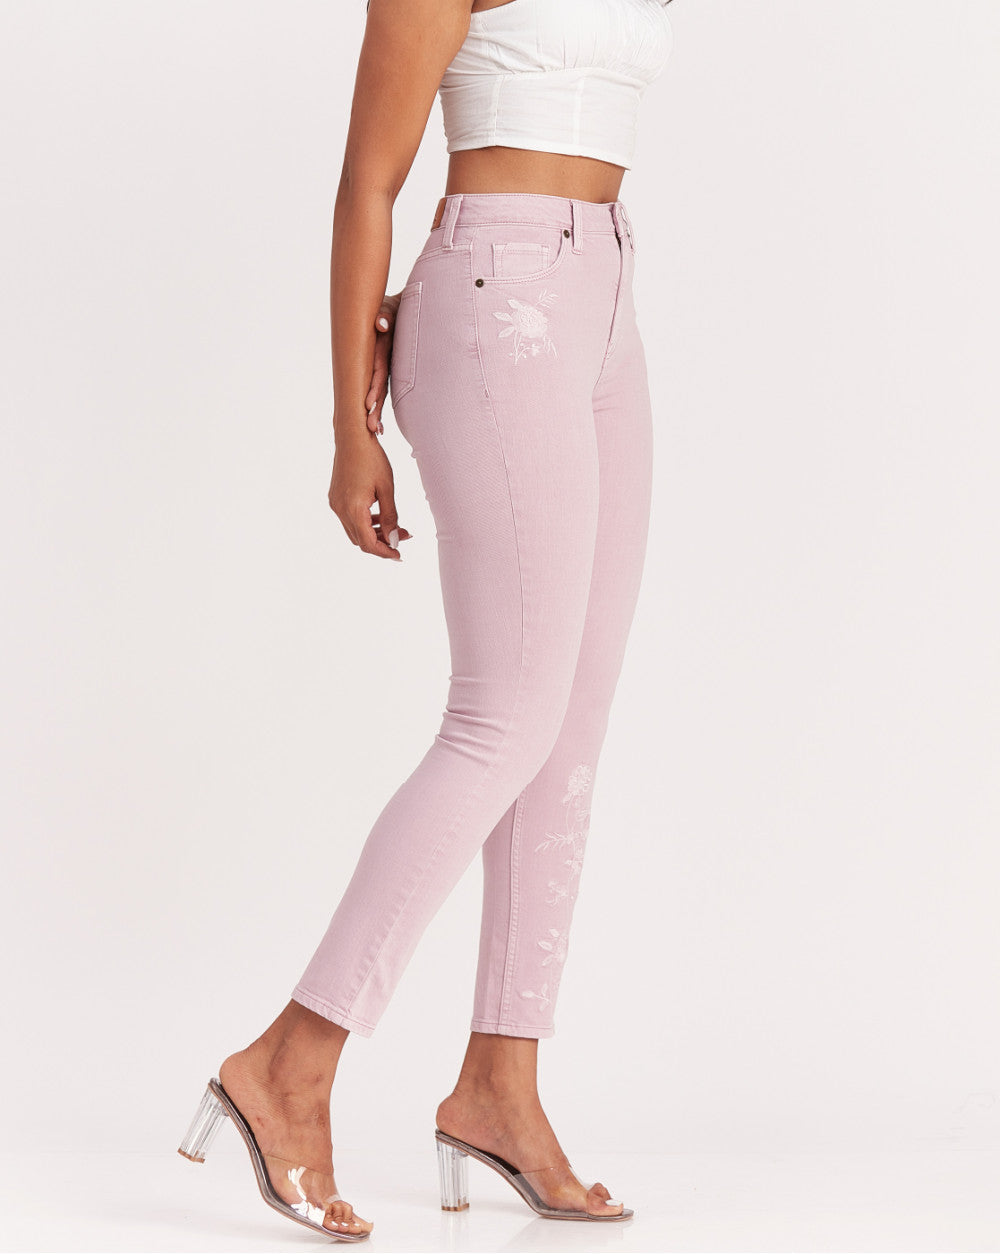 Skinny Fit High Waist Floral Embroidered Colored Jeans - Lush Lilac